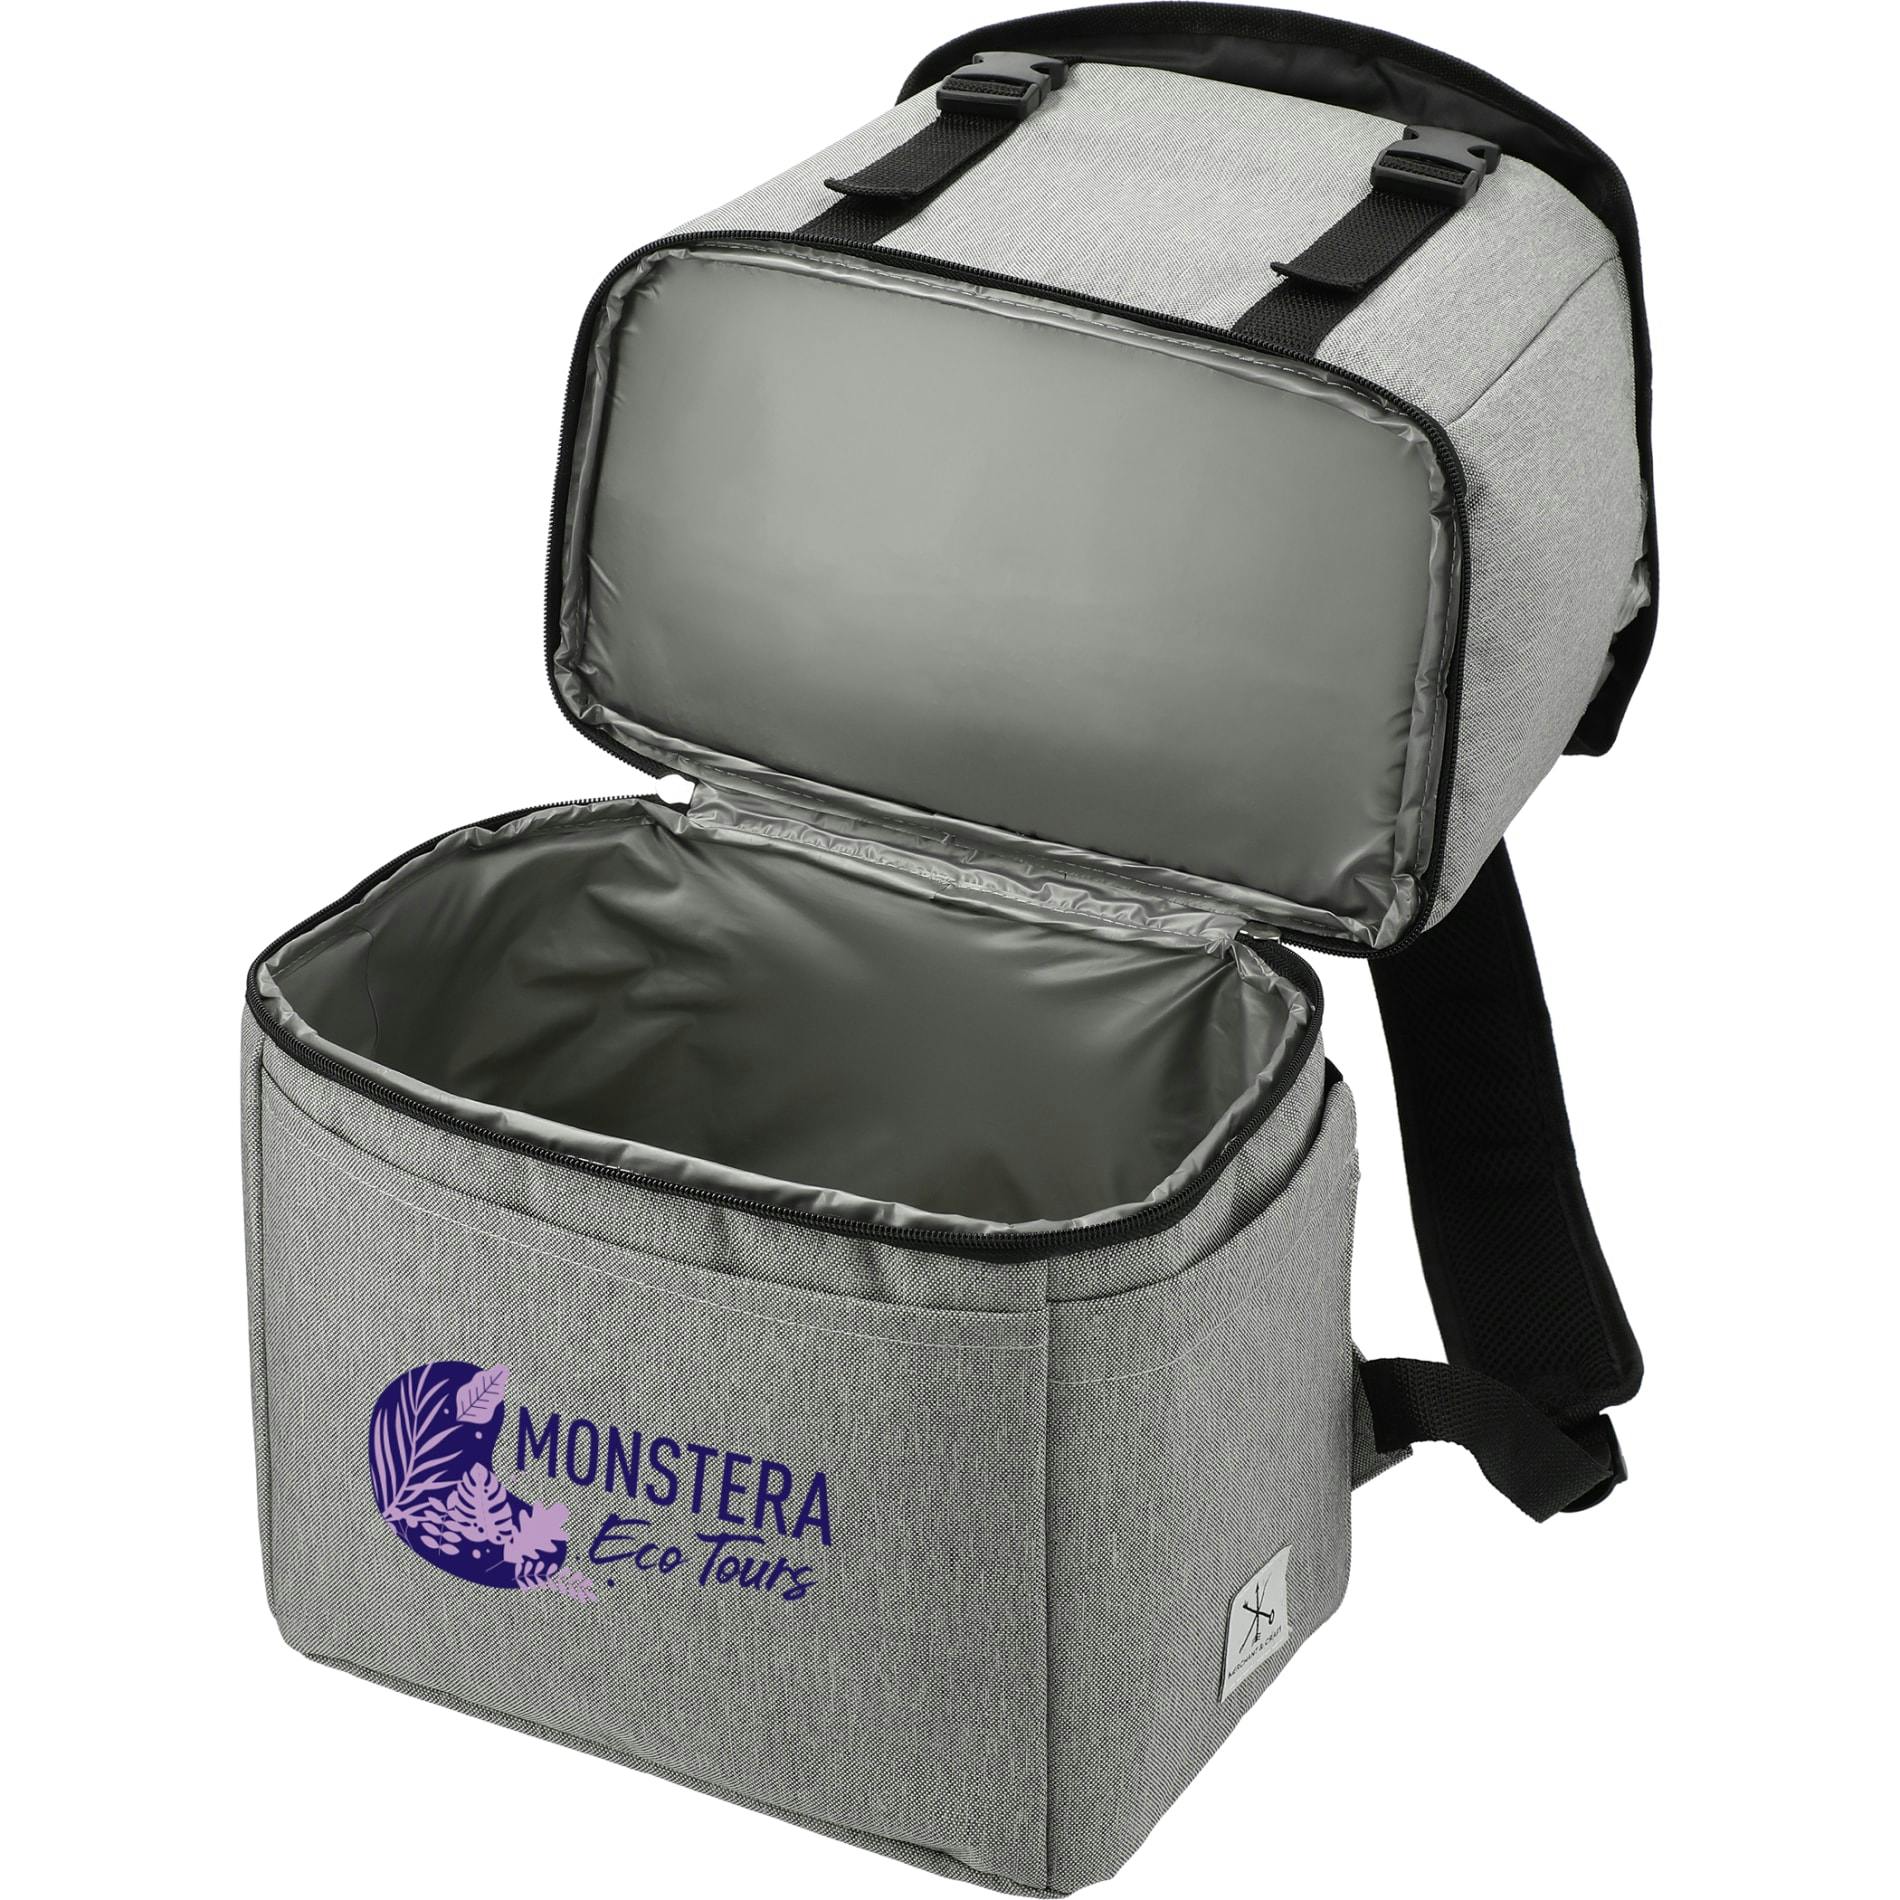 Merchant & Craft Revive Recycled Backpack Cooler - additional Image 3